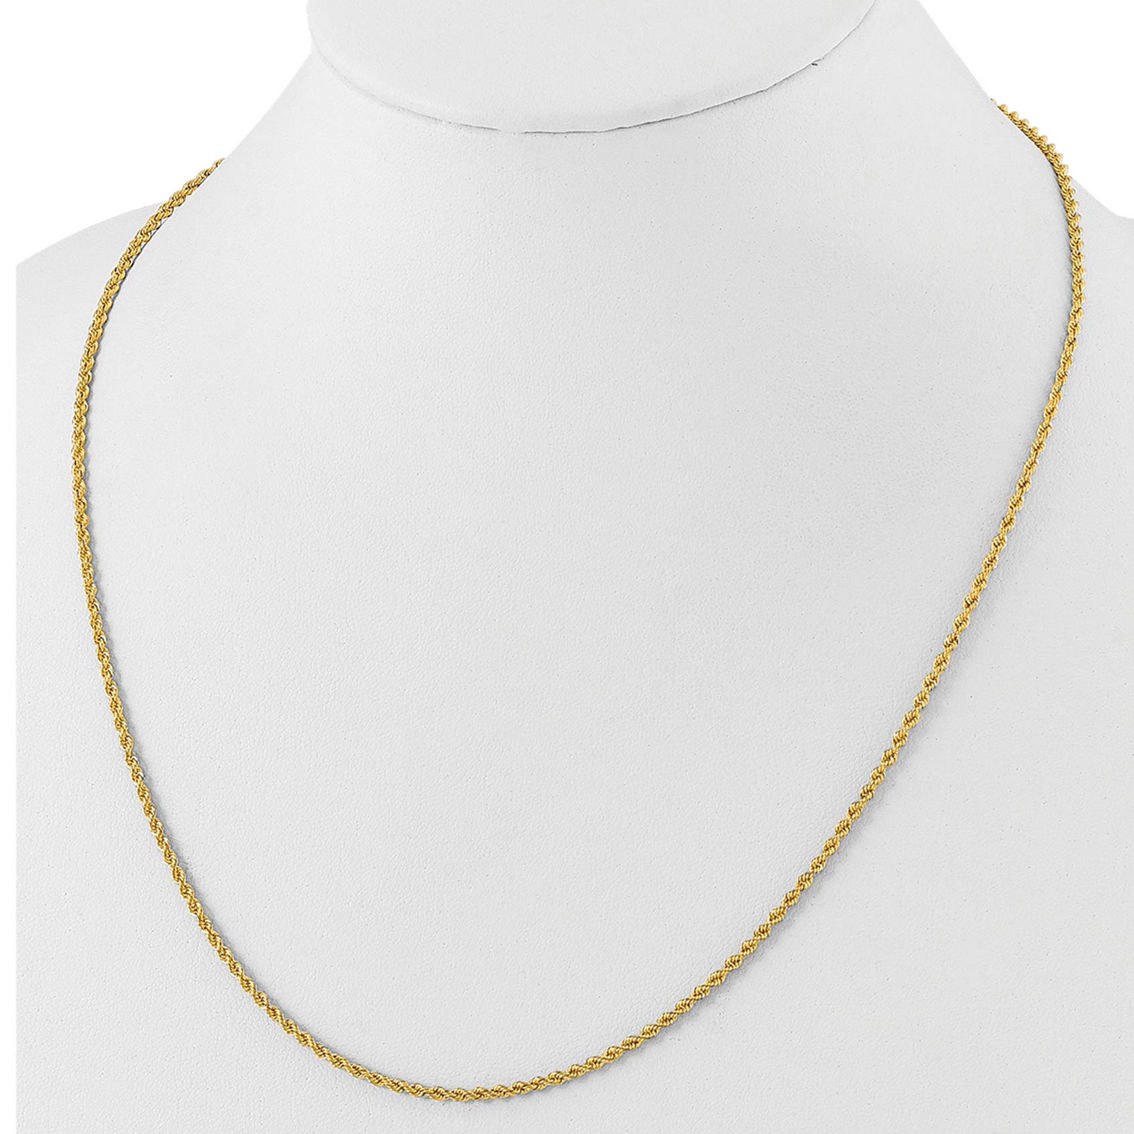 24K Pure Gold 22 in. Rope Chain Necklace - Image 6 of 8